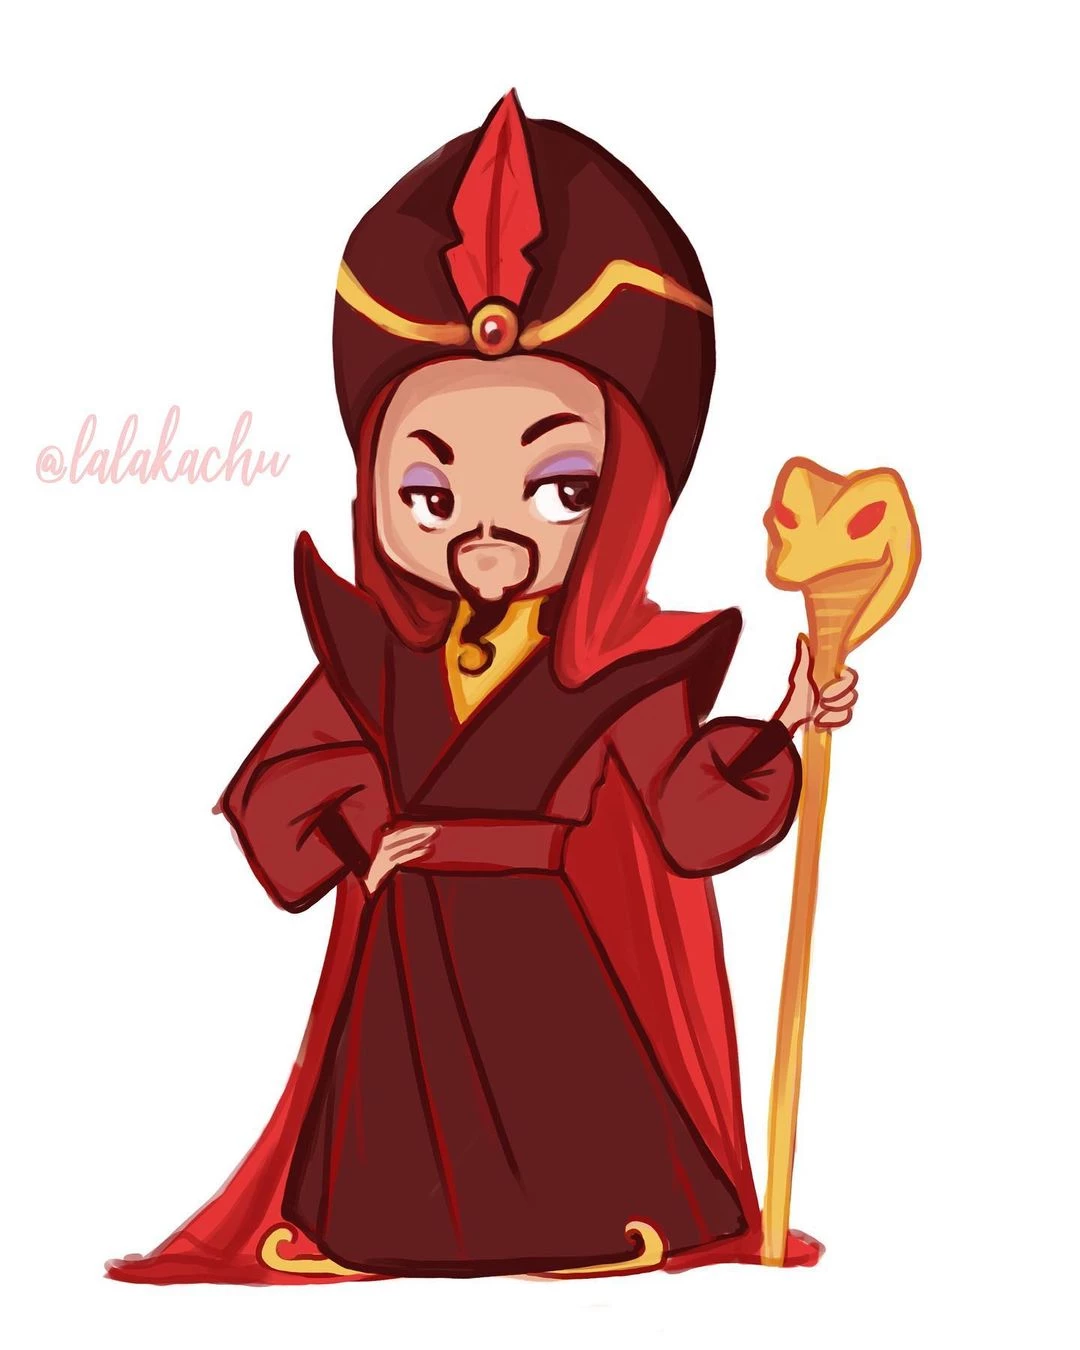 In This Form, Jafar Looks Much Less Nefarious Than Usual